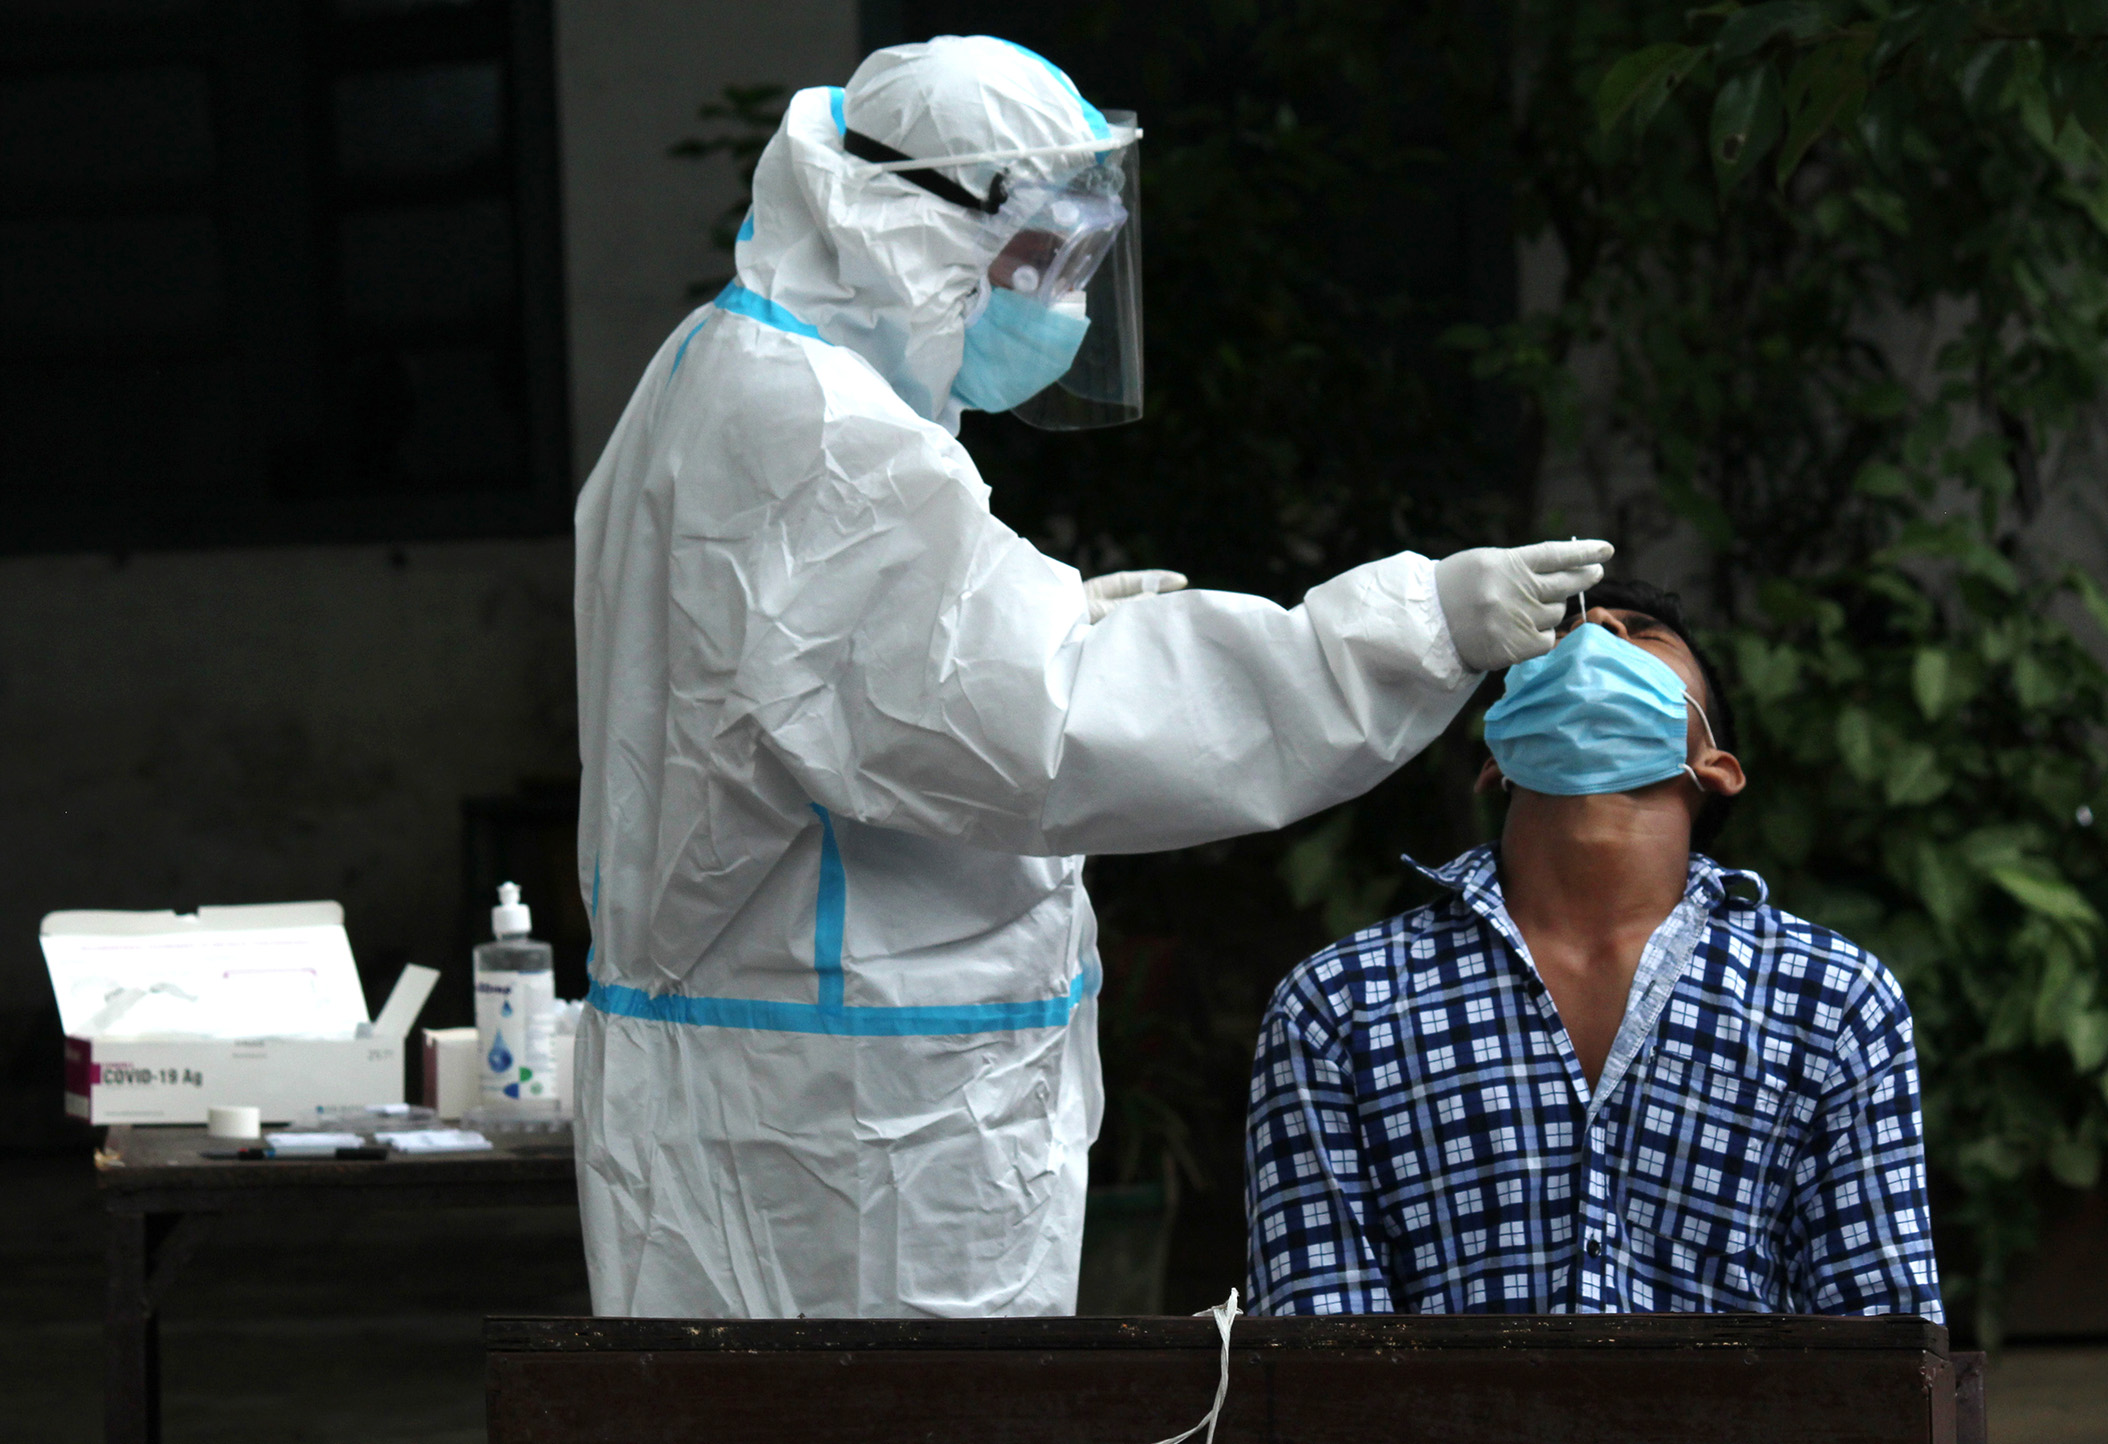 A health worker in personal protective equipment (PPE) collects a swab sample from a patient for COVID-19 Rapid Antigen Testing, on Friday, September 4, in New Delhi, India. 